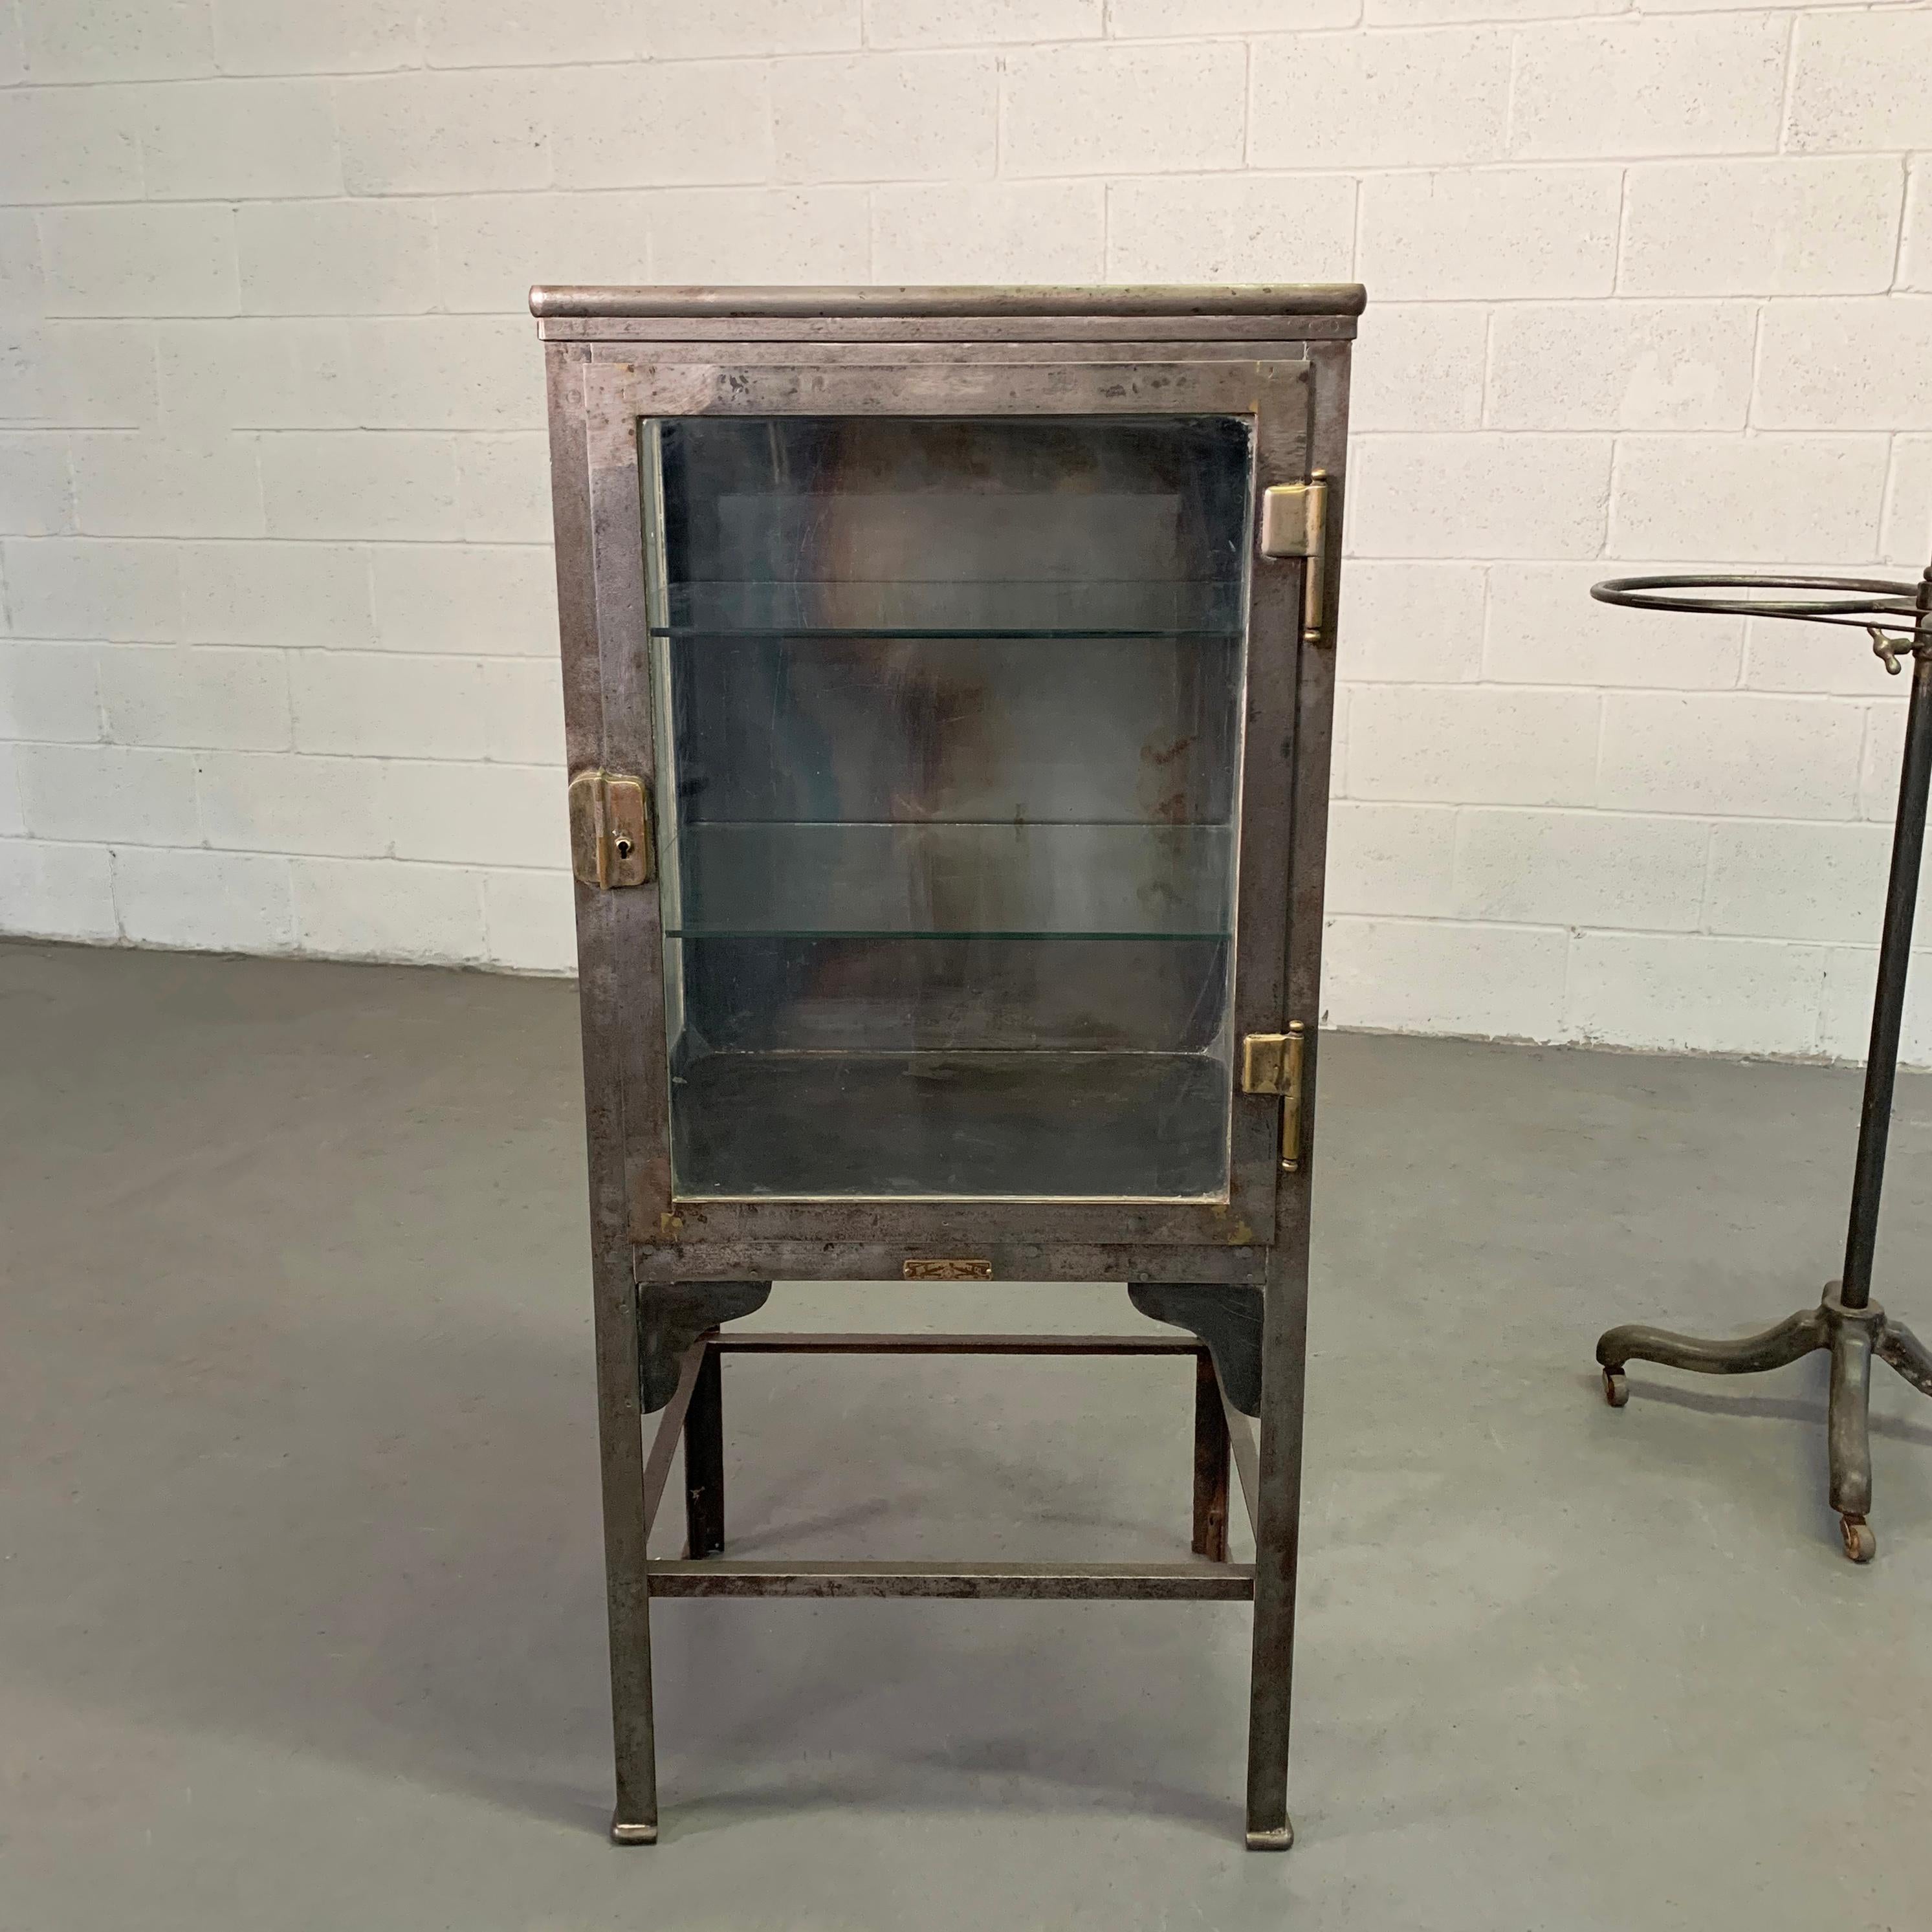 Nicely sized, petite, early 20th century, industrial, apothecary cabinet by The Hospital Supply Co., New York features a newly brushed, steel frame inside and out with glass on 3 sides and 2 glass shelves. The case itself is 26.5 inches height.